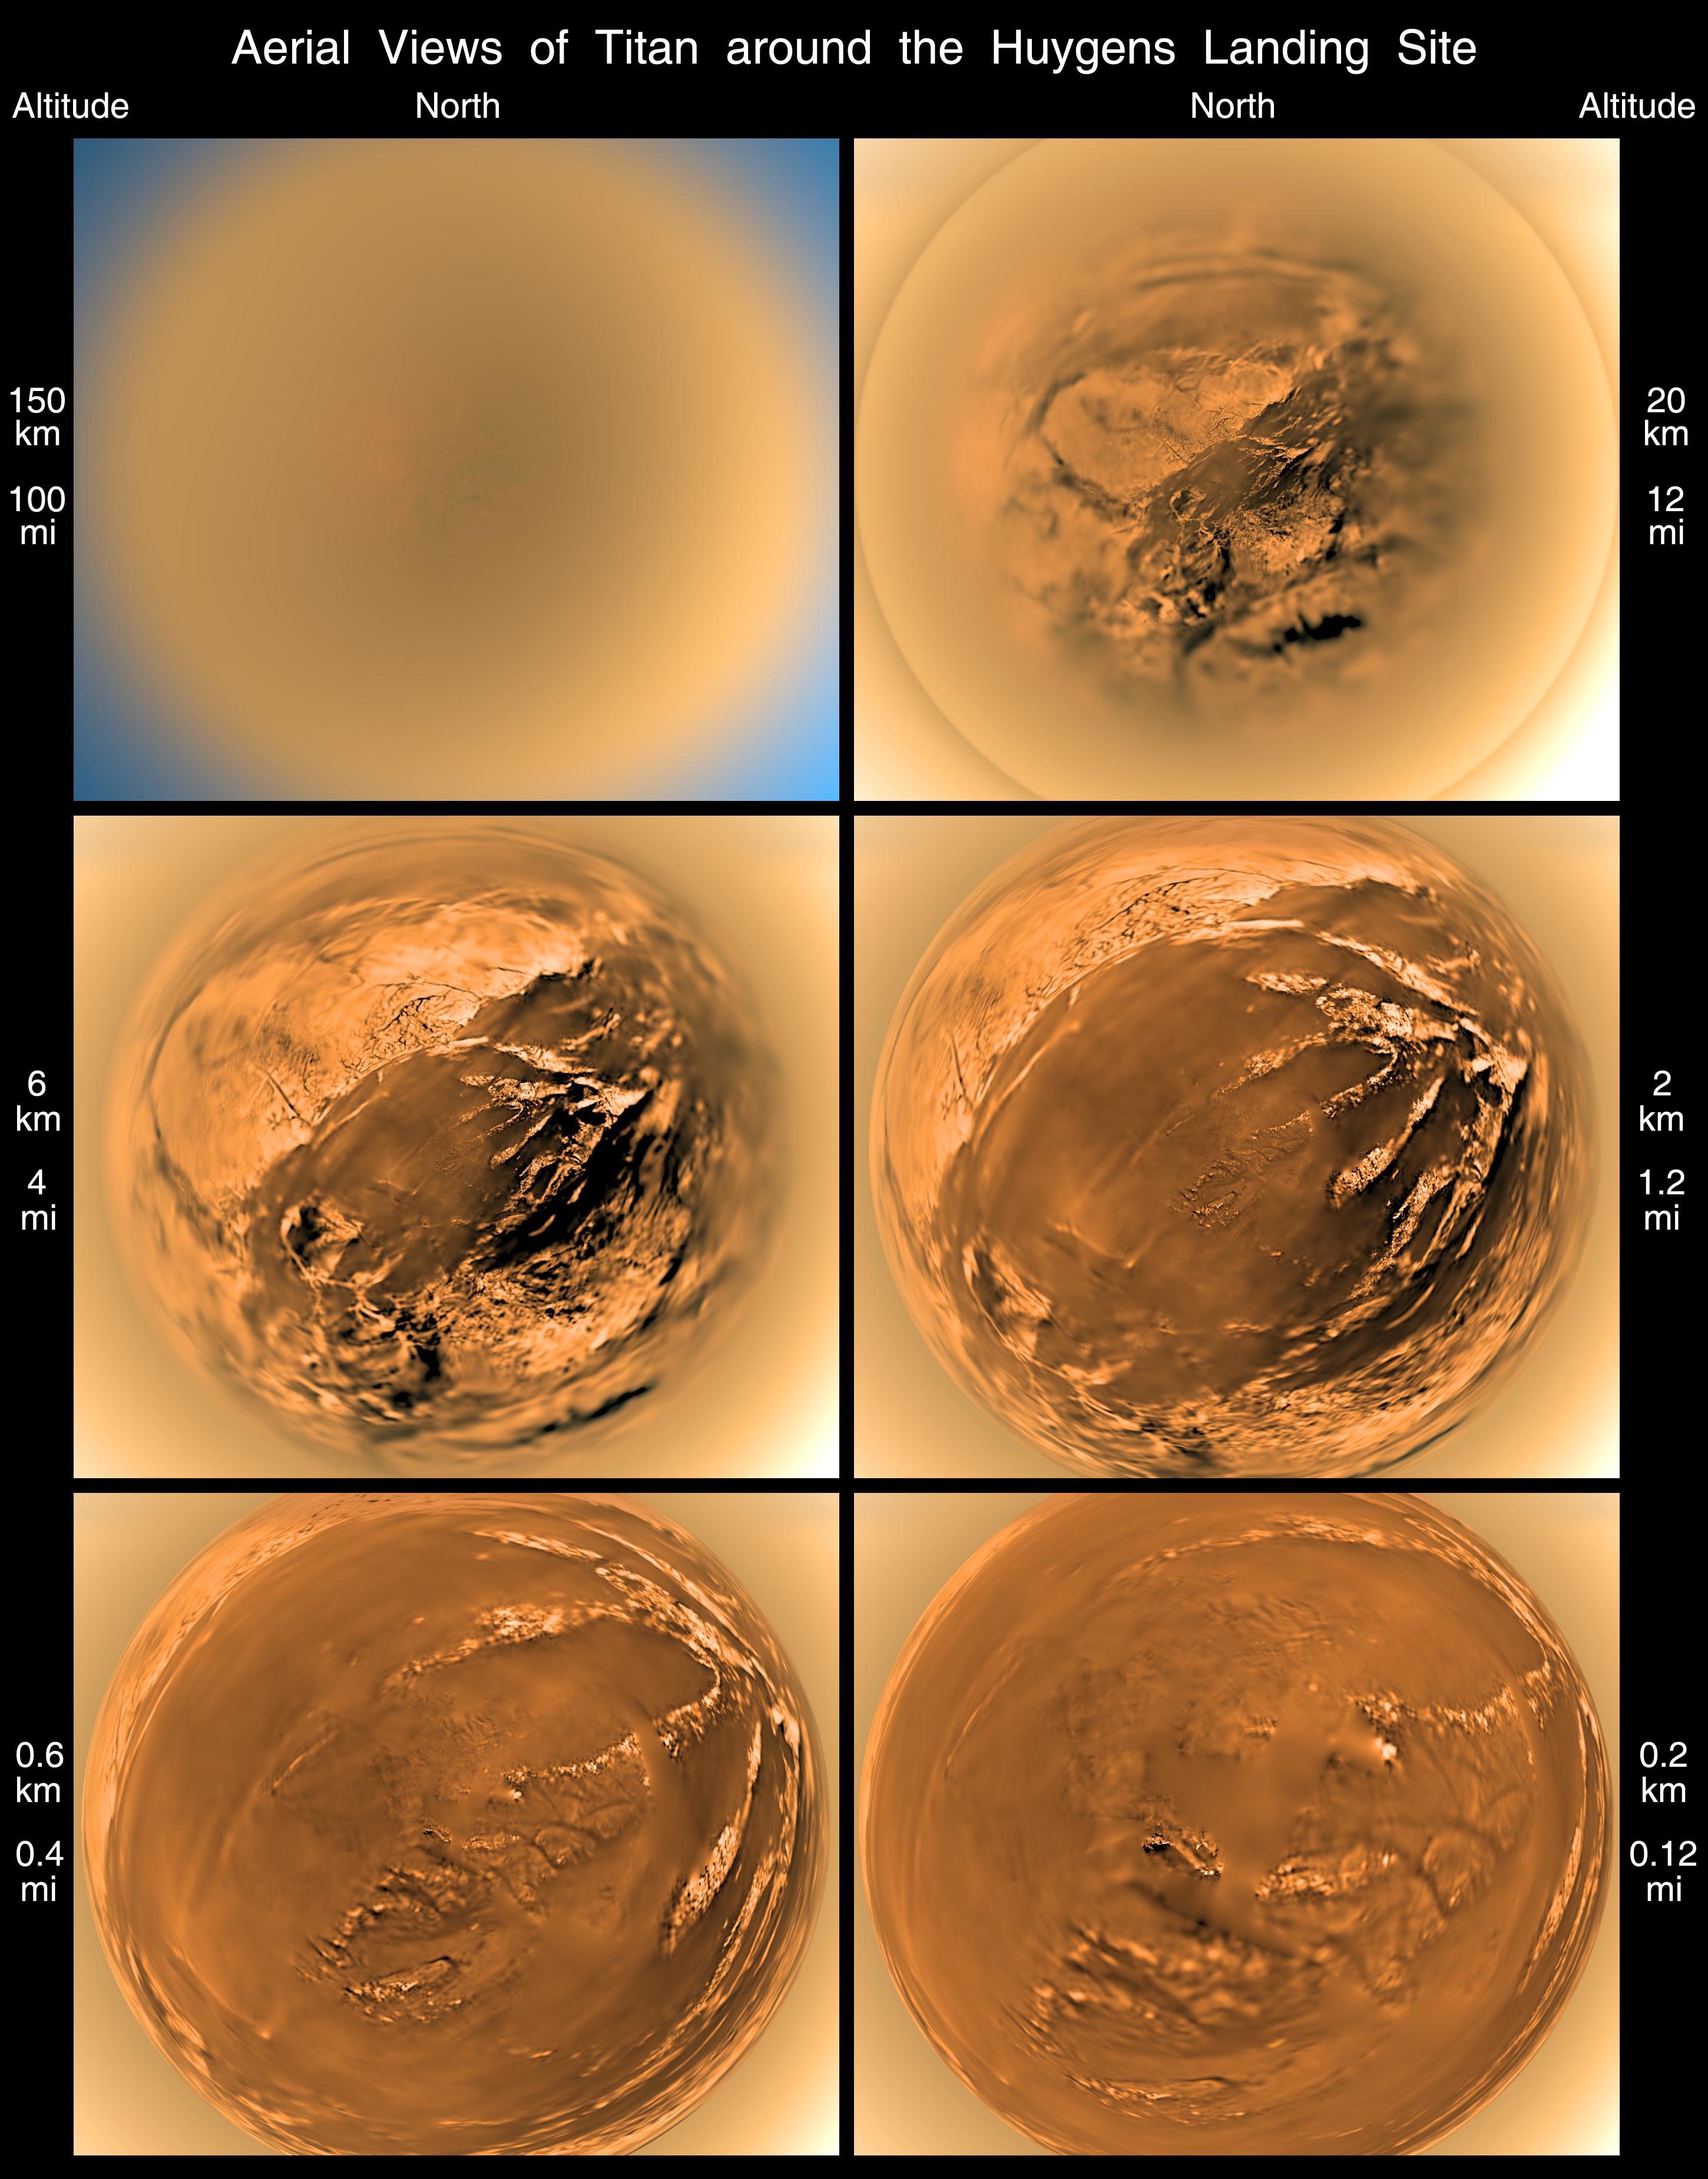 This poster shows a stereographic (fish-eye) view of Titan's surface from six different altitudes